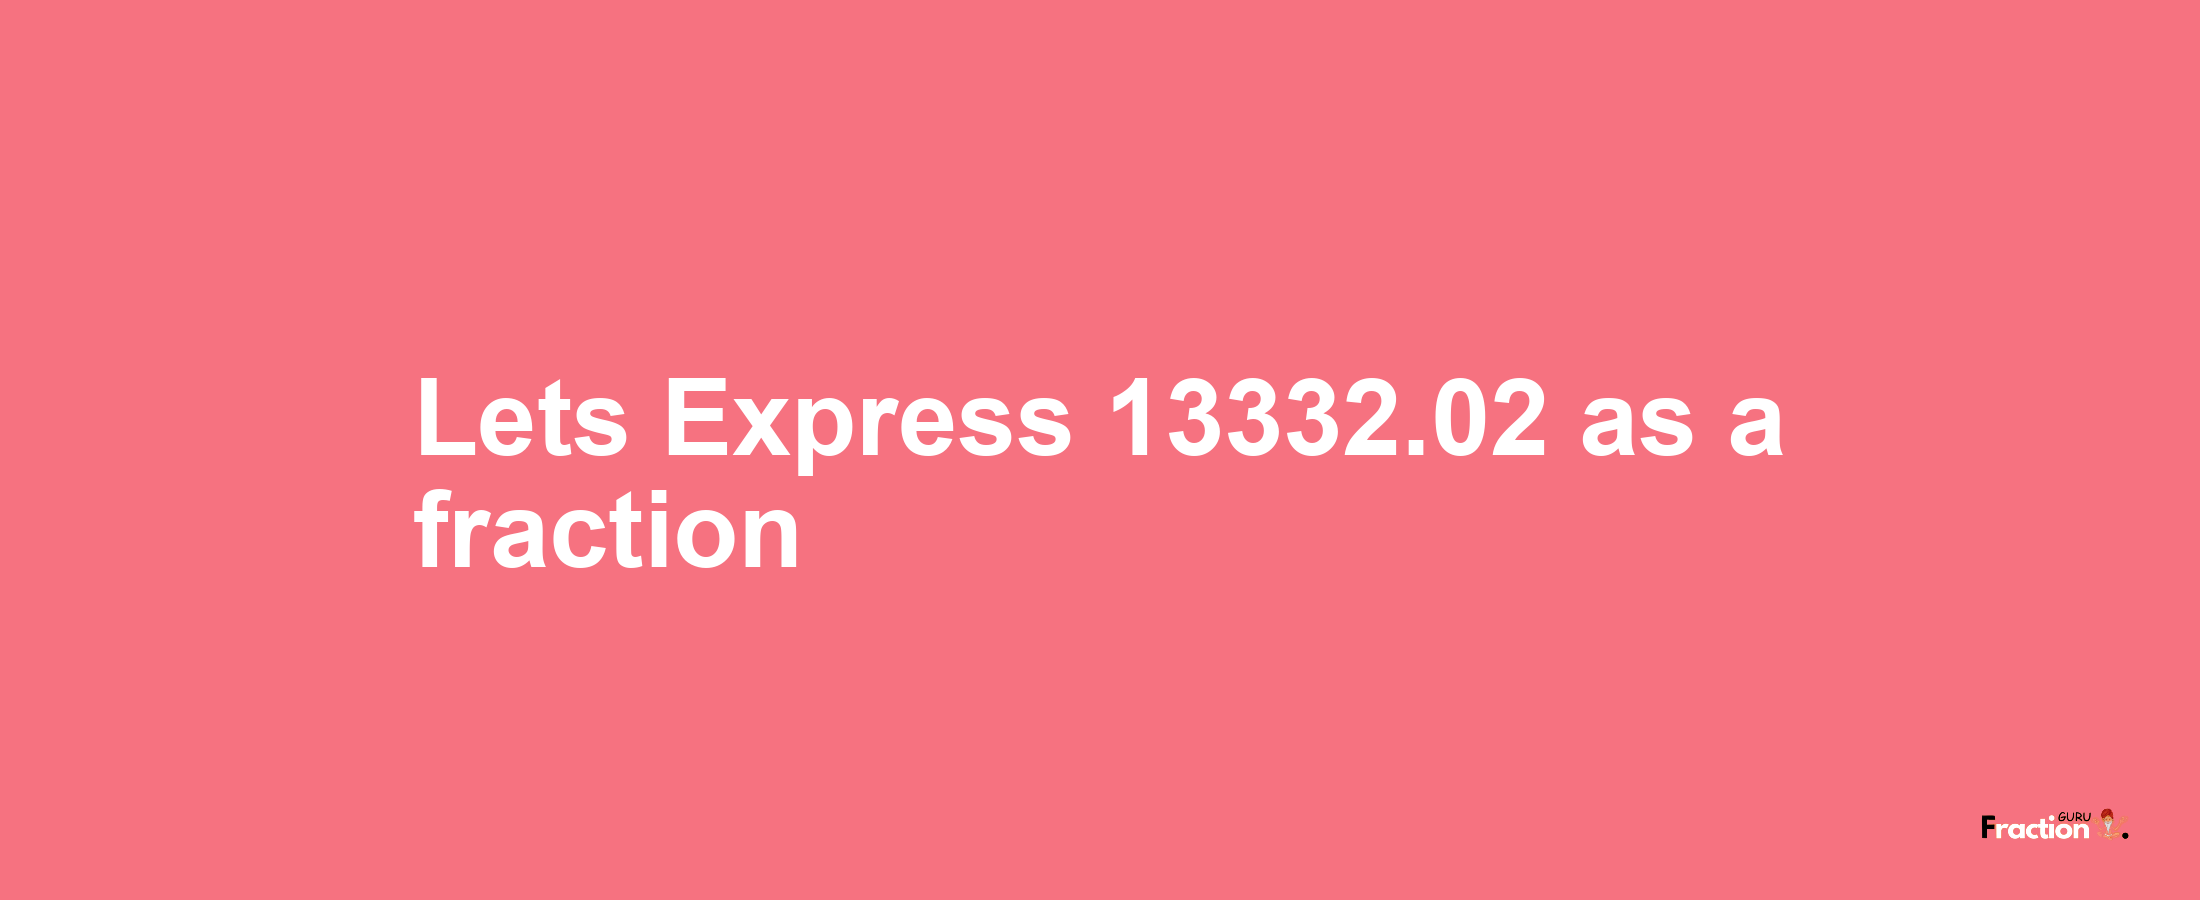 Lets Express 13332.02 as afraction